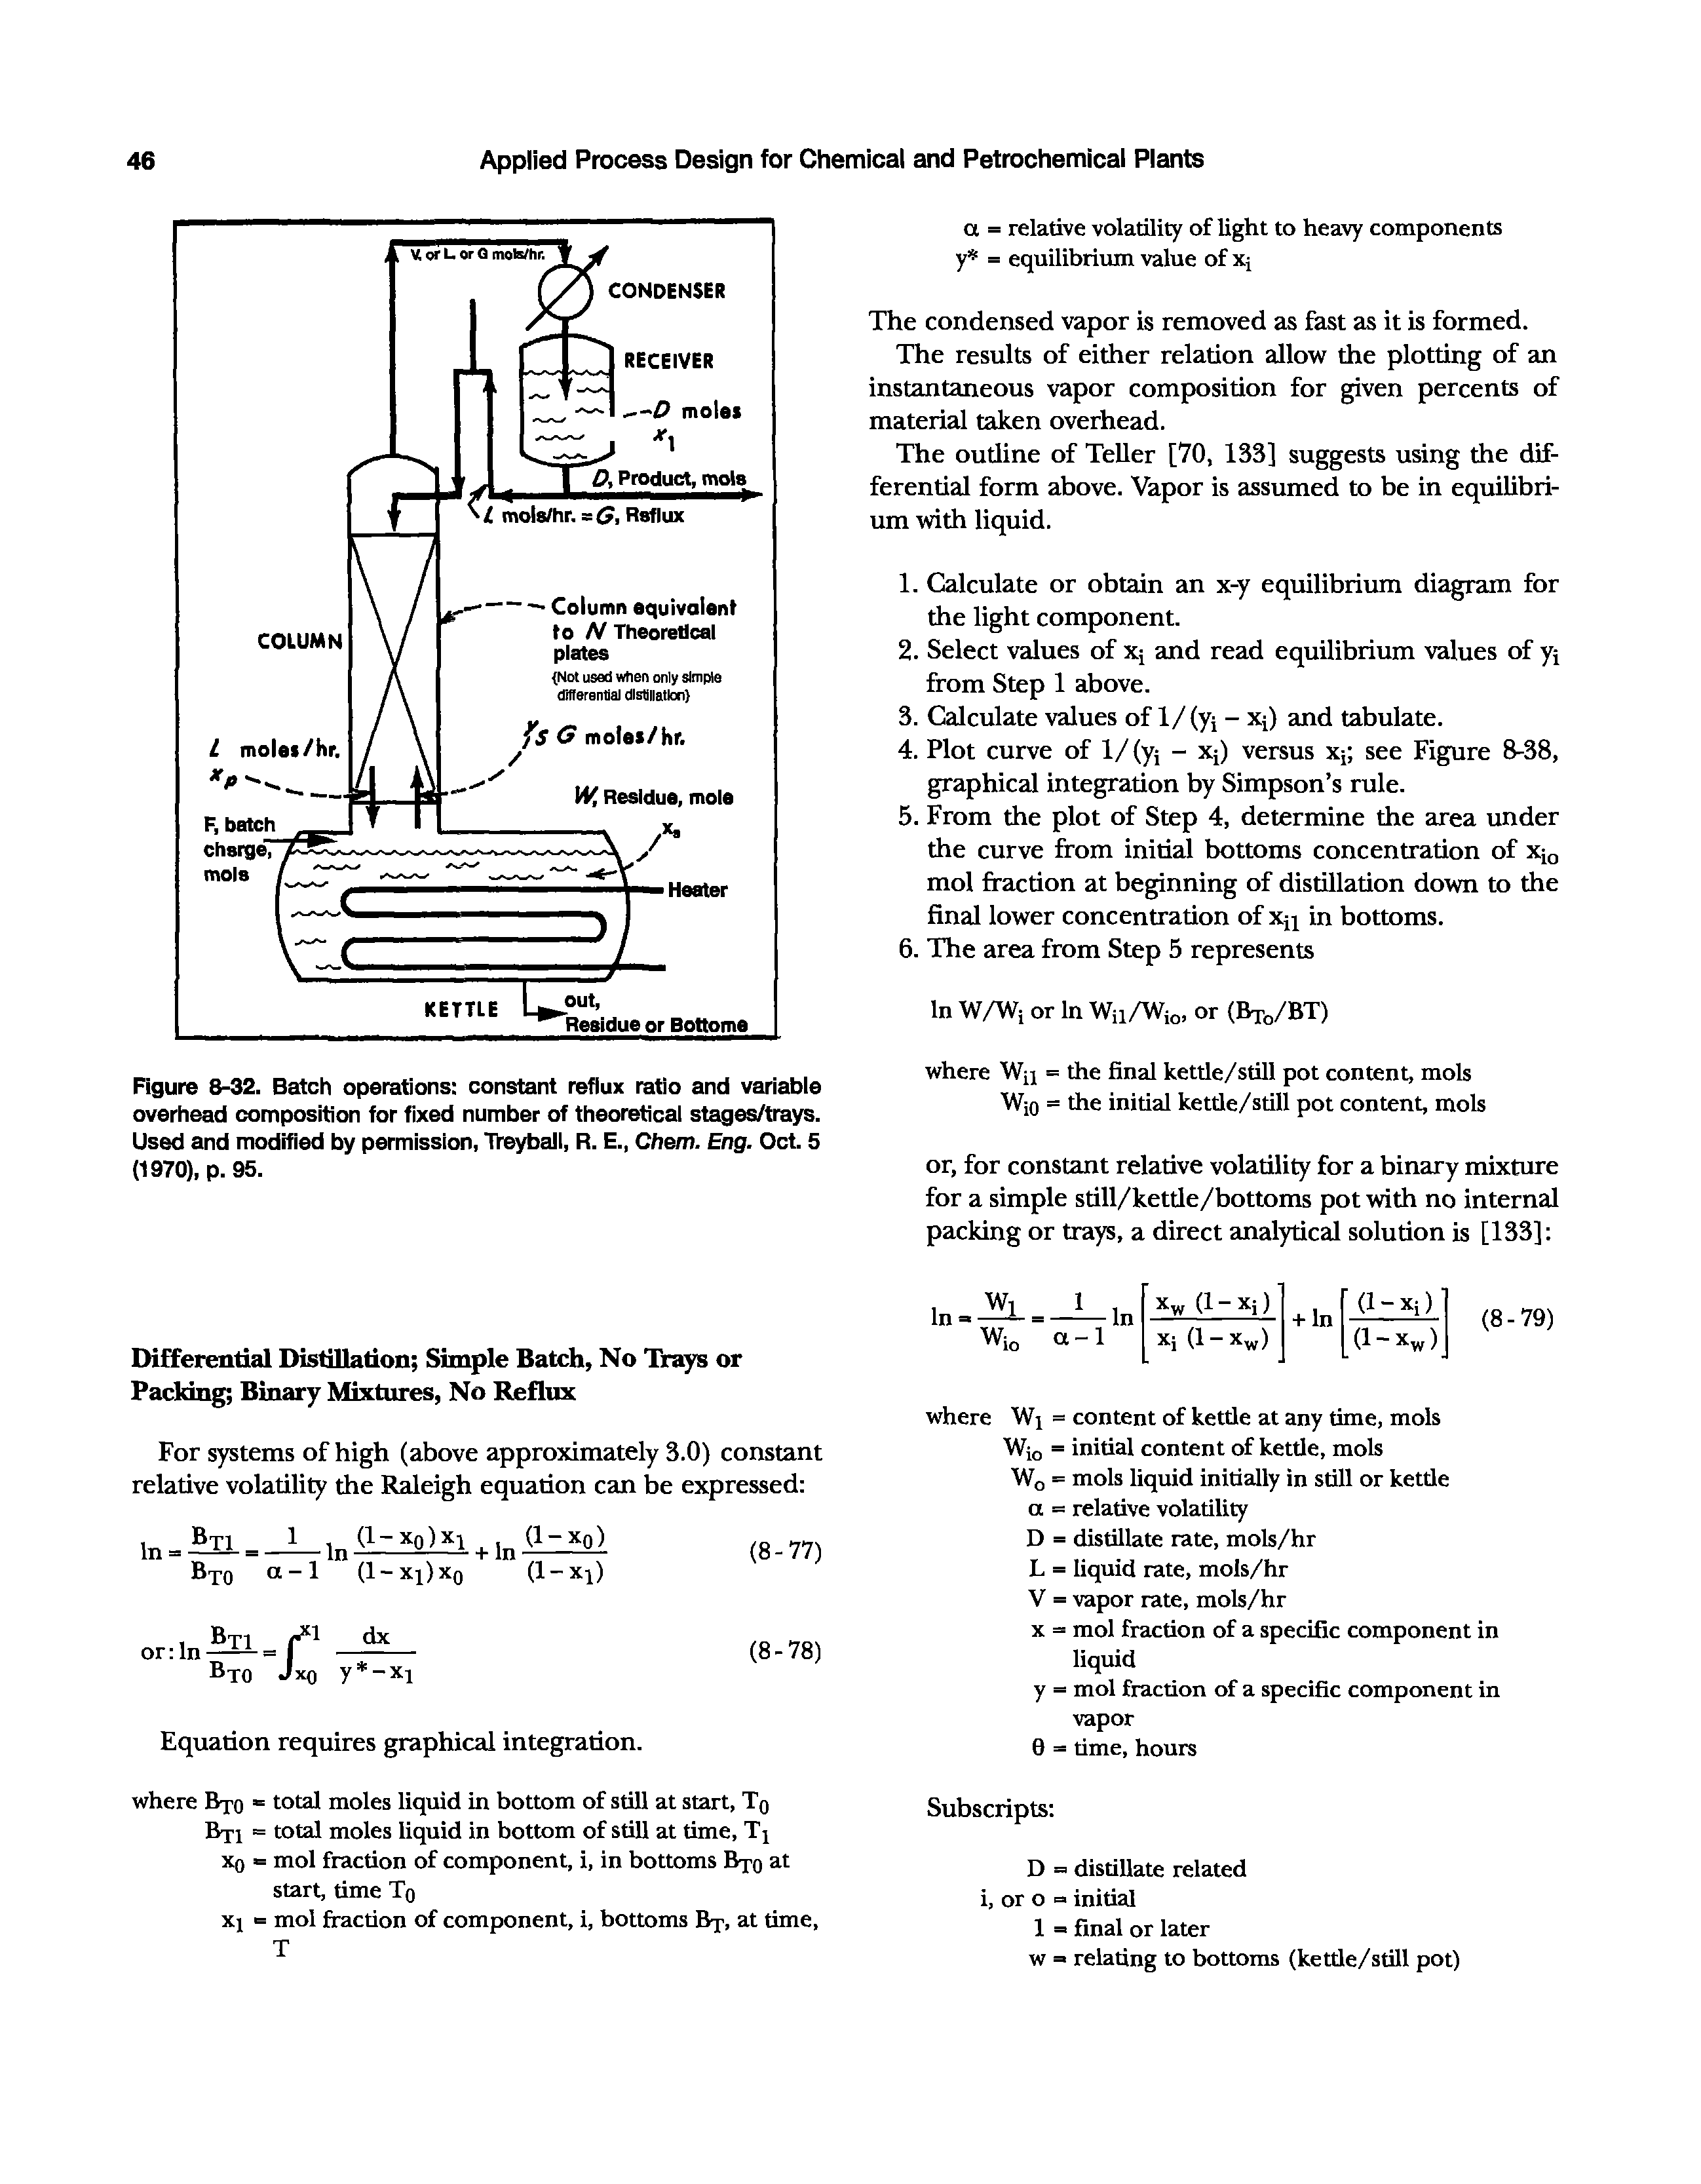 Figure 8-32. Batch operations constant reflux ratio and variable overhead composition for fixed number of theoreticai stages/trays. Used and modified by permission, TreybaJi, R. E., Chem. Eng. Oct. 5 (1970), p. 95.